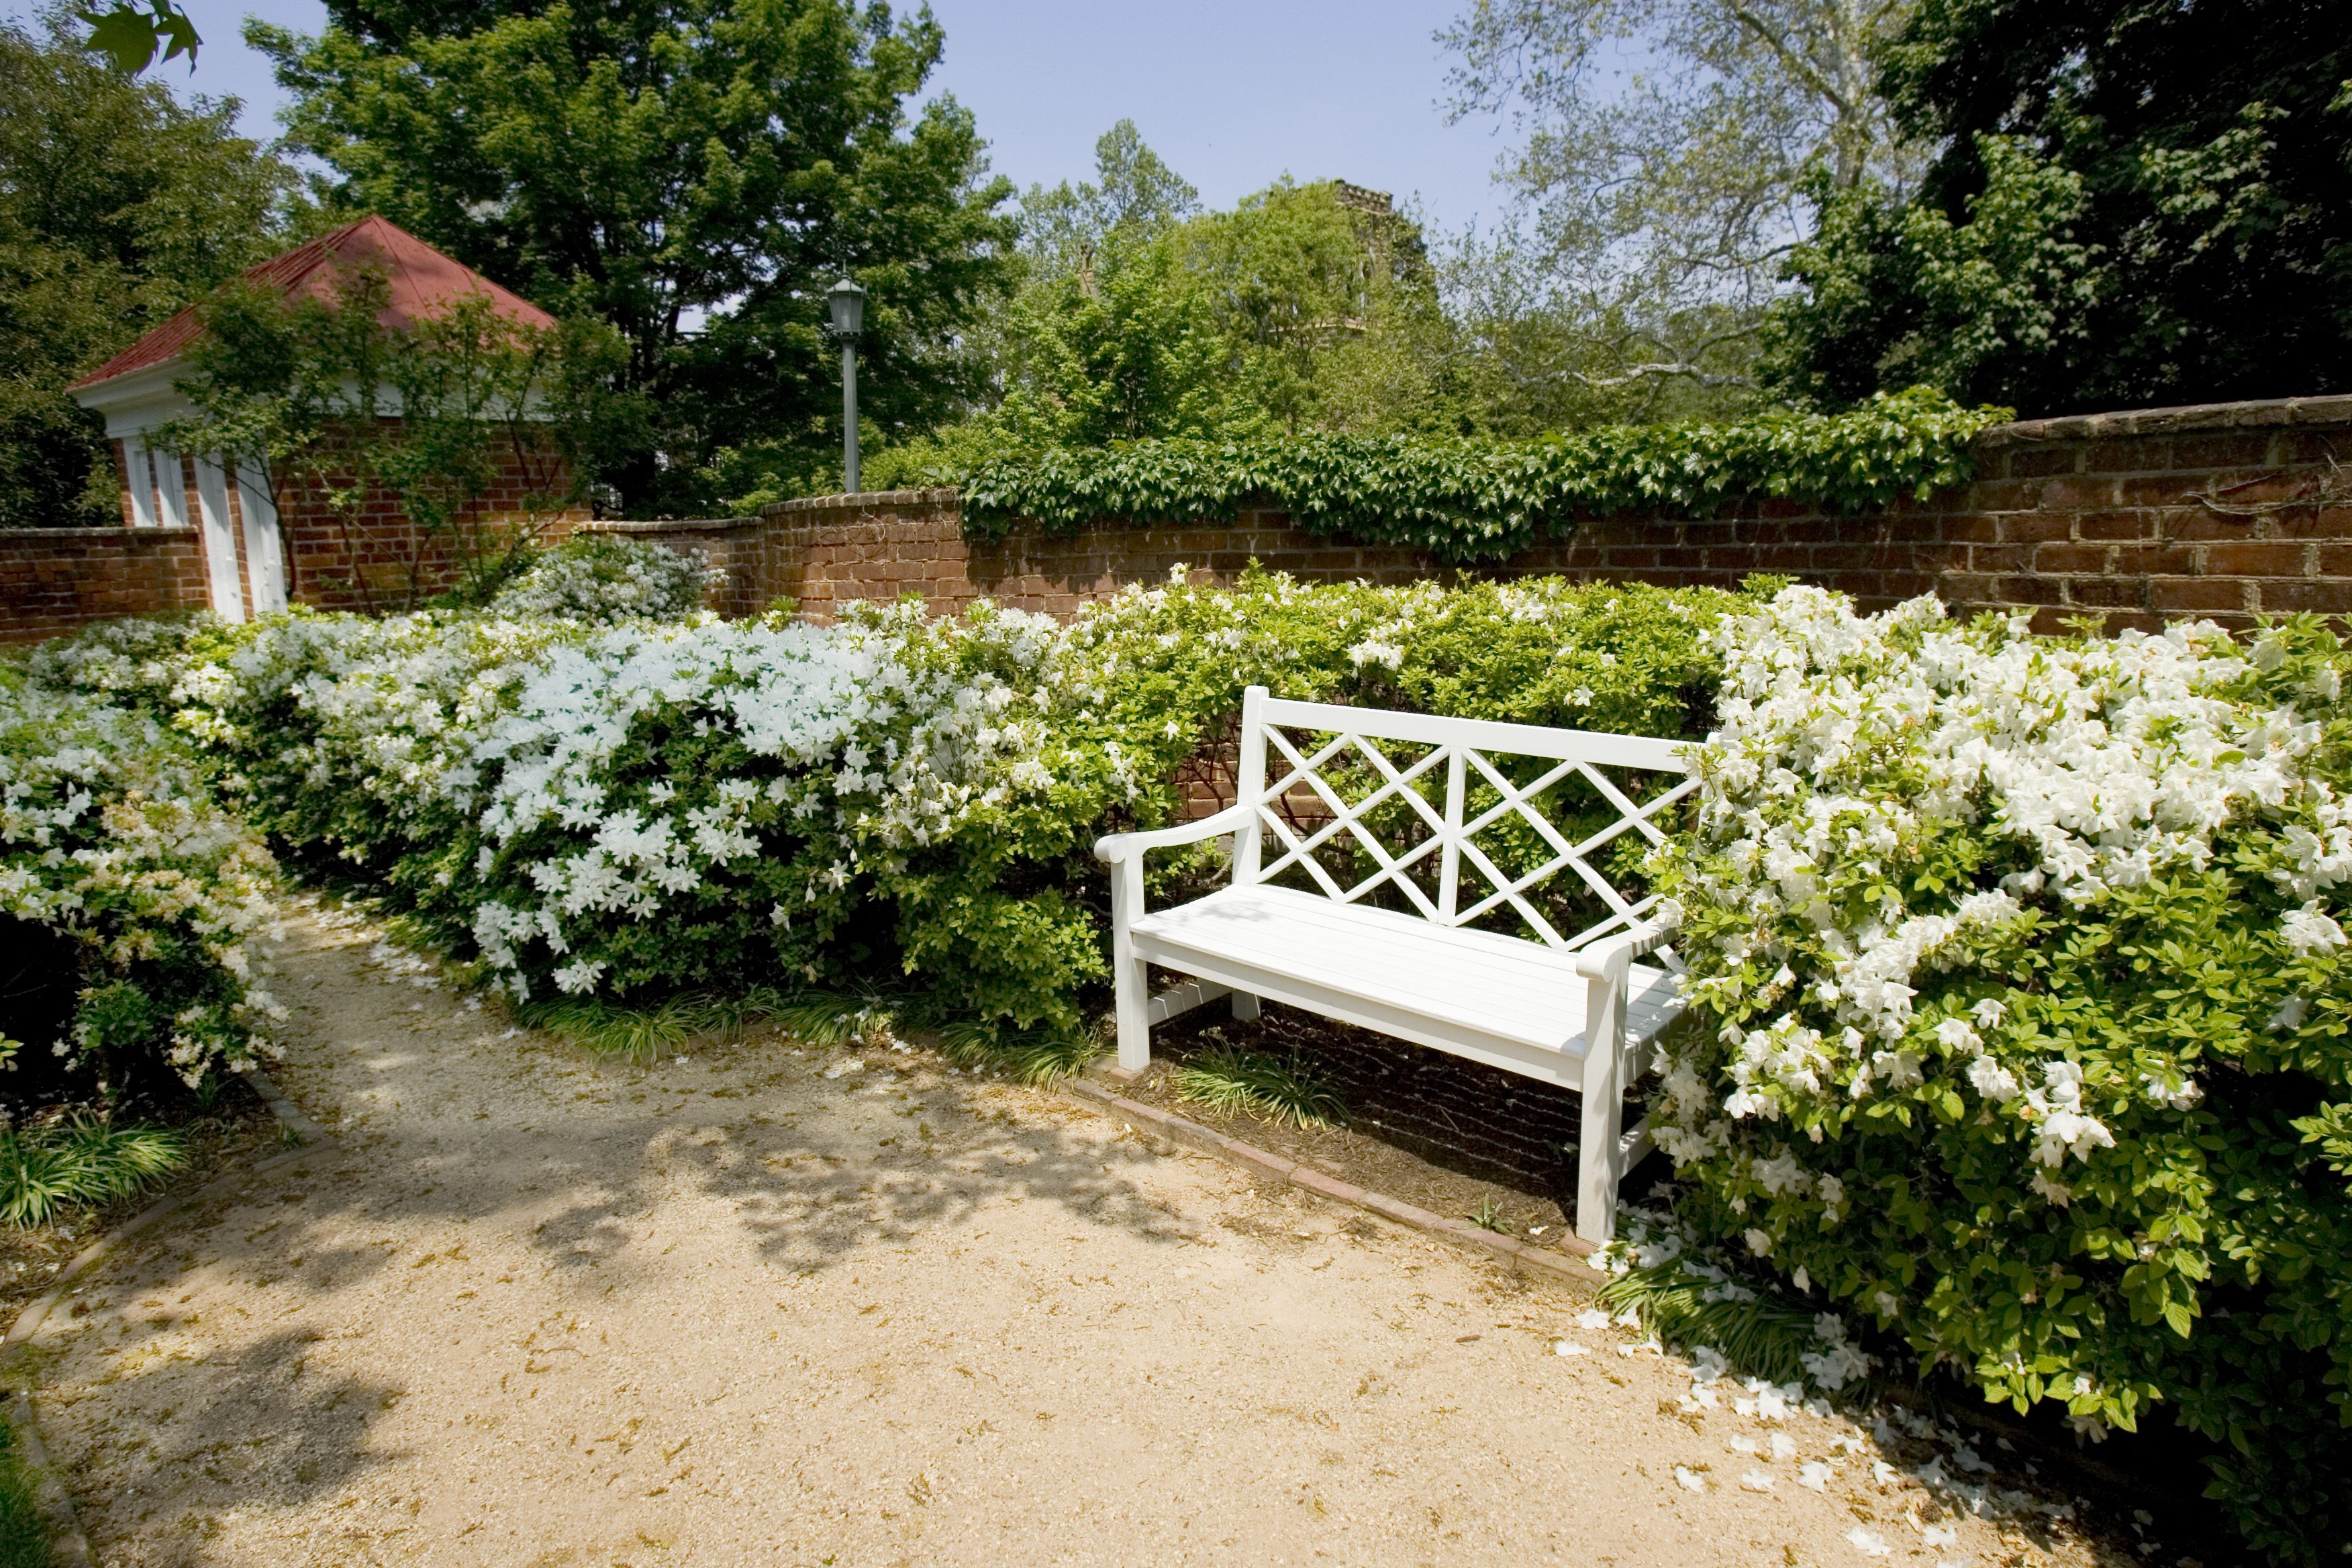 White bench surrounded by green bushes with white flowers